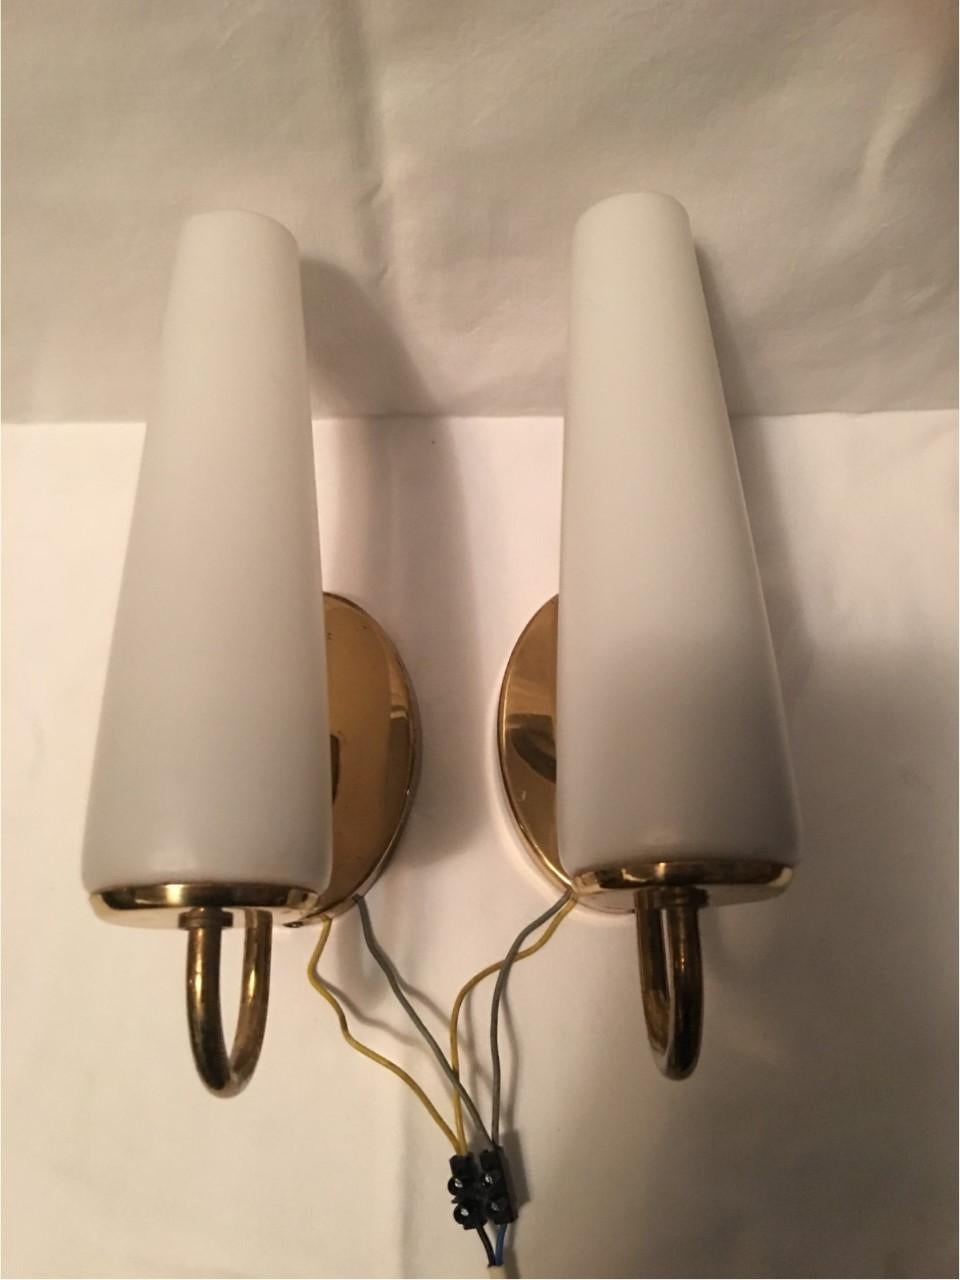 Set of German Bauhaus Art Deco Copper and Milk Glass Sconces from 1930s In Good Condition For Sale In Frisco, TX